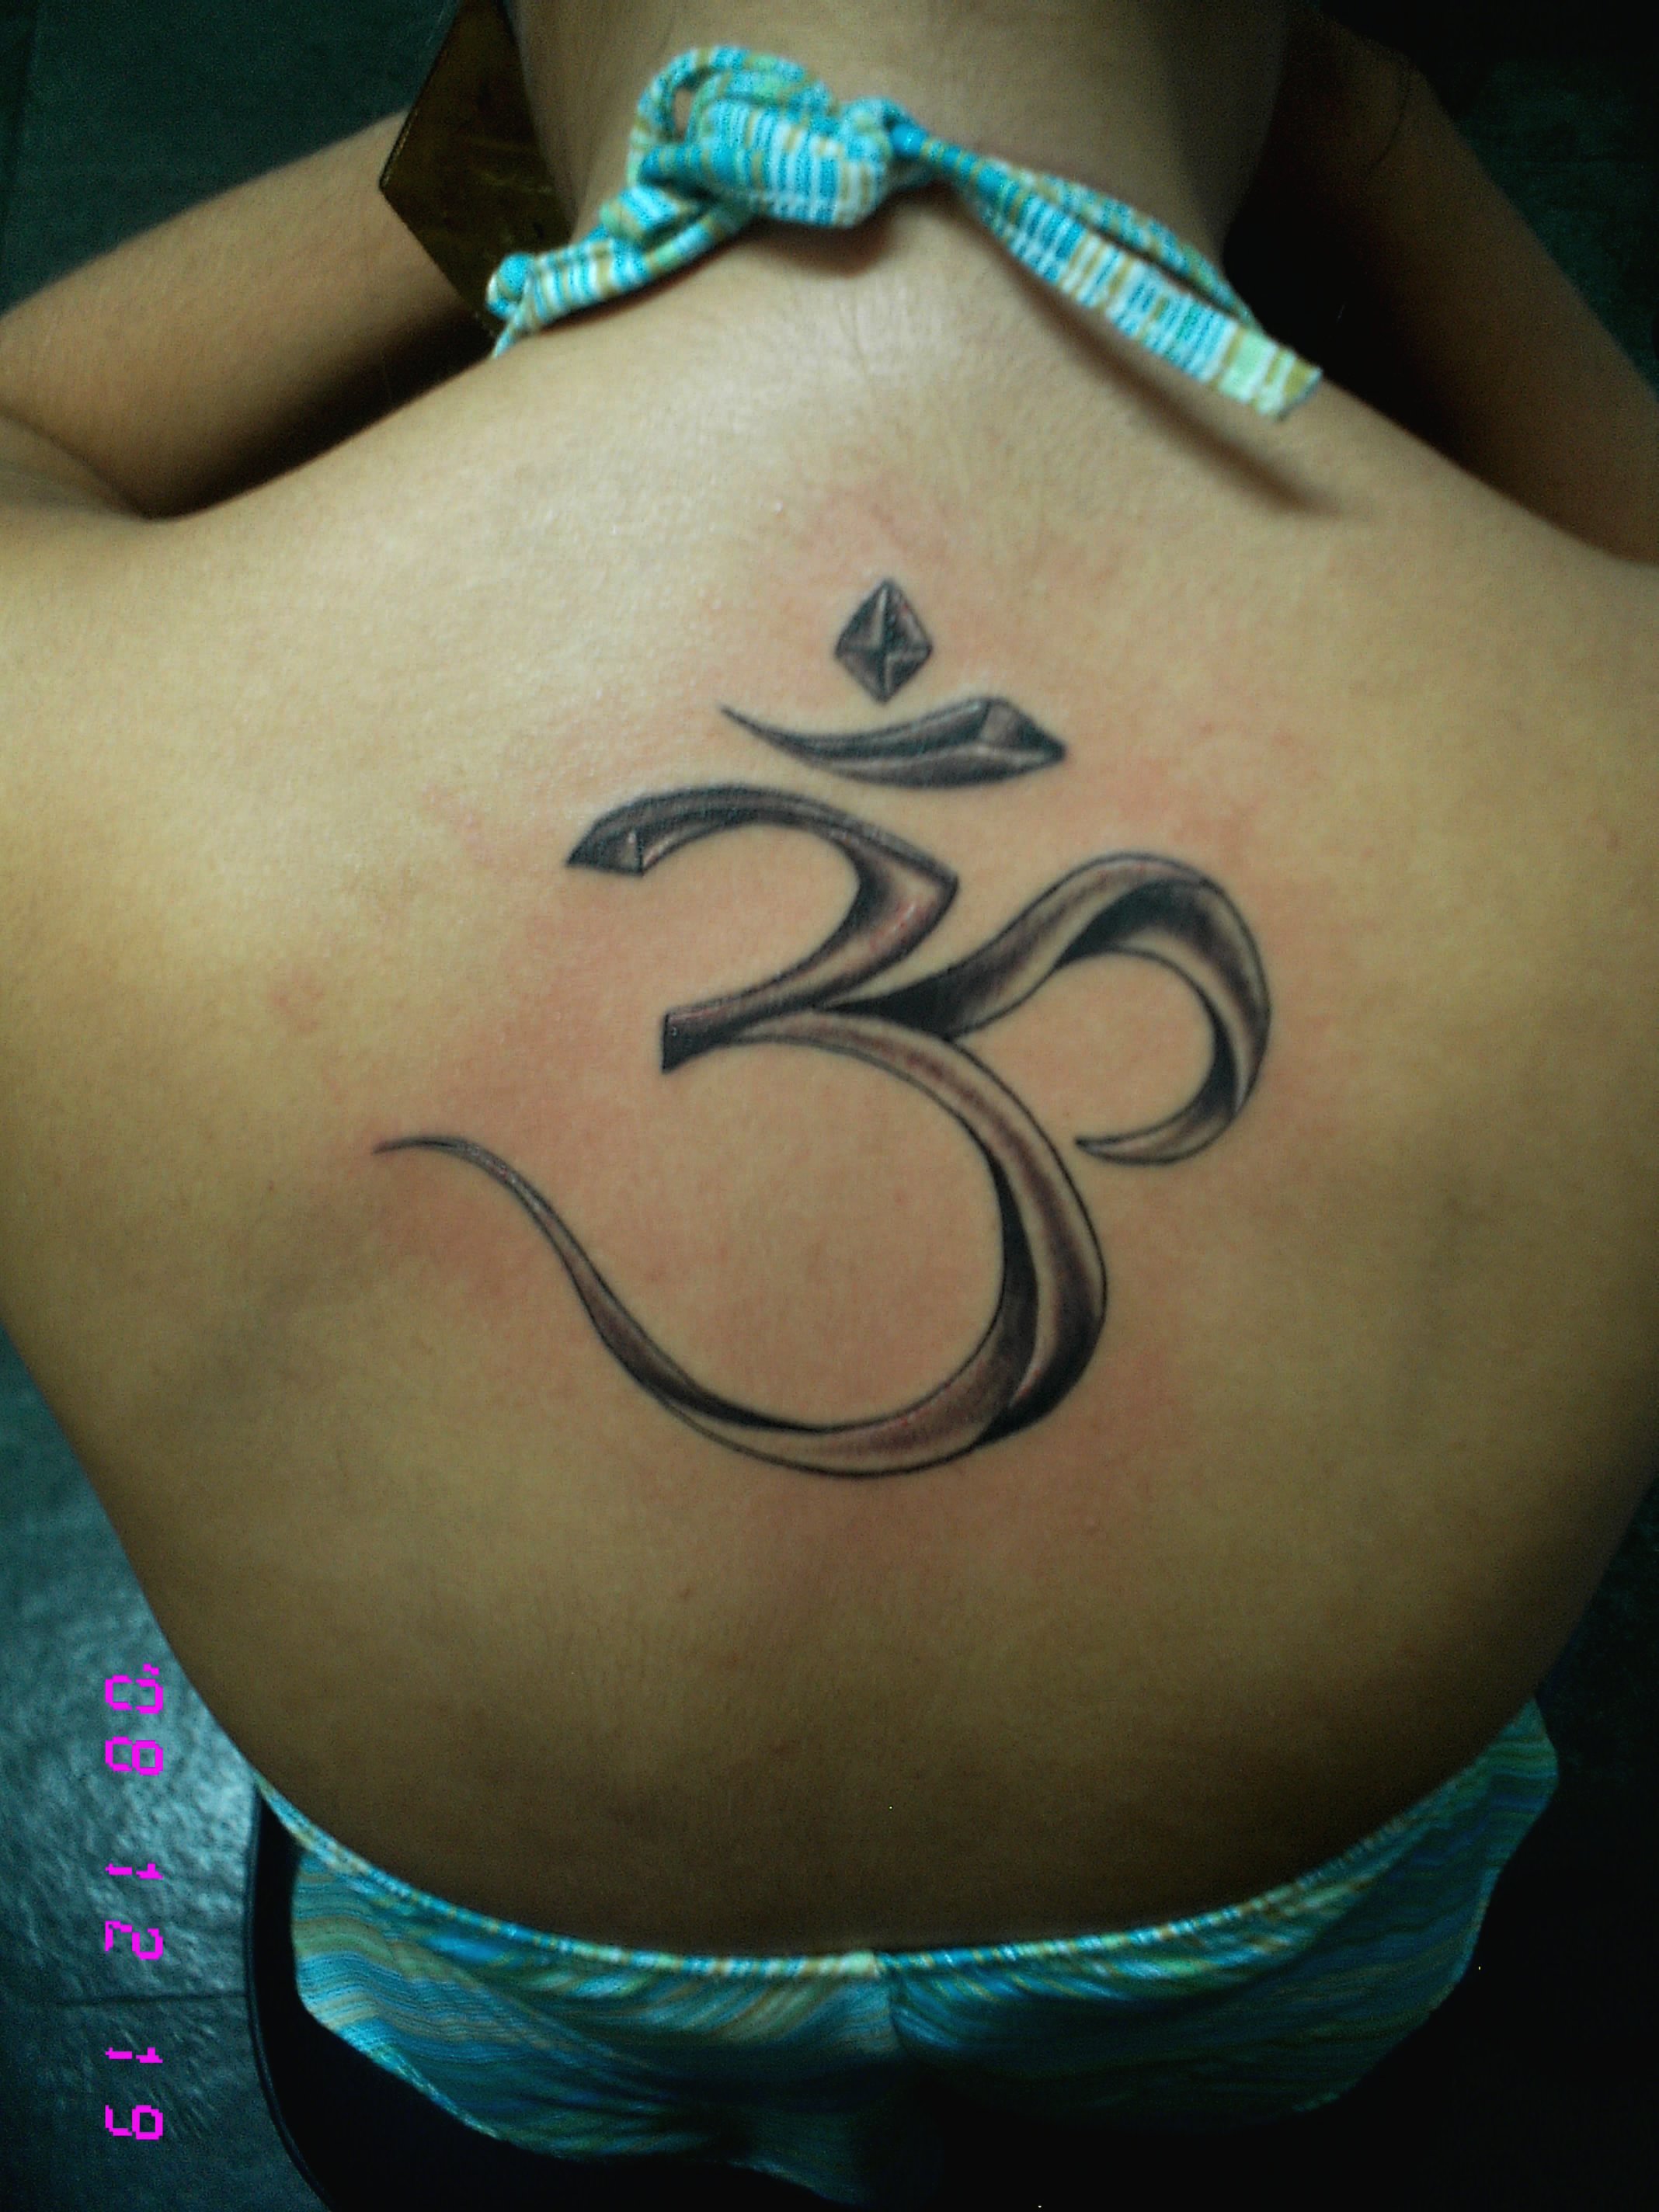 Om Tattoos Designs, Ideas and Meaning | Tattoos For You